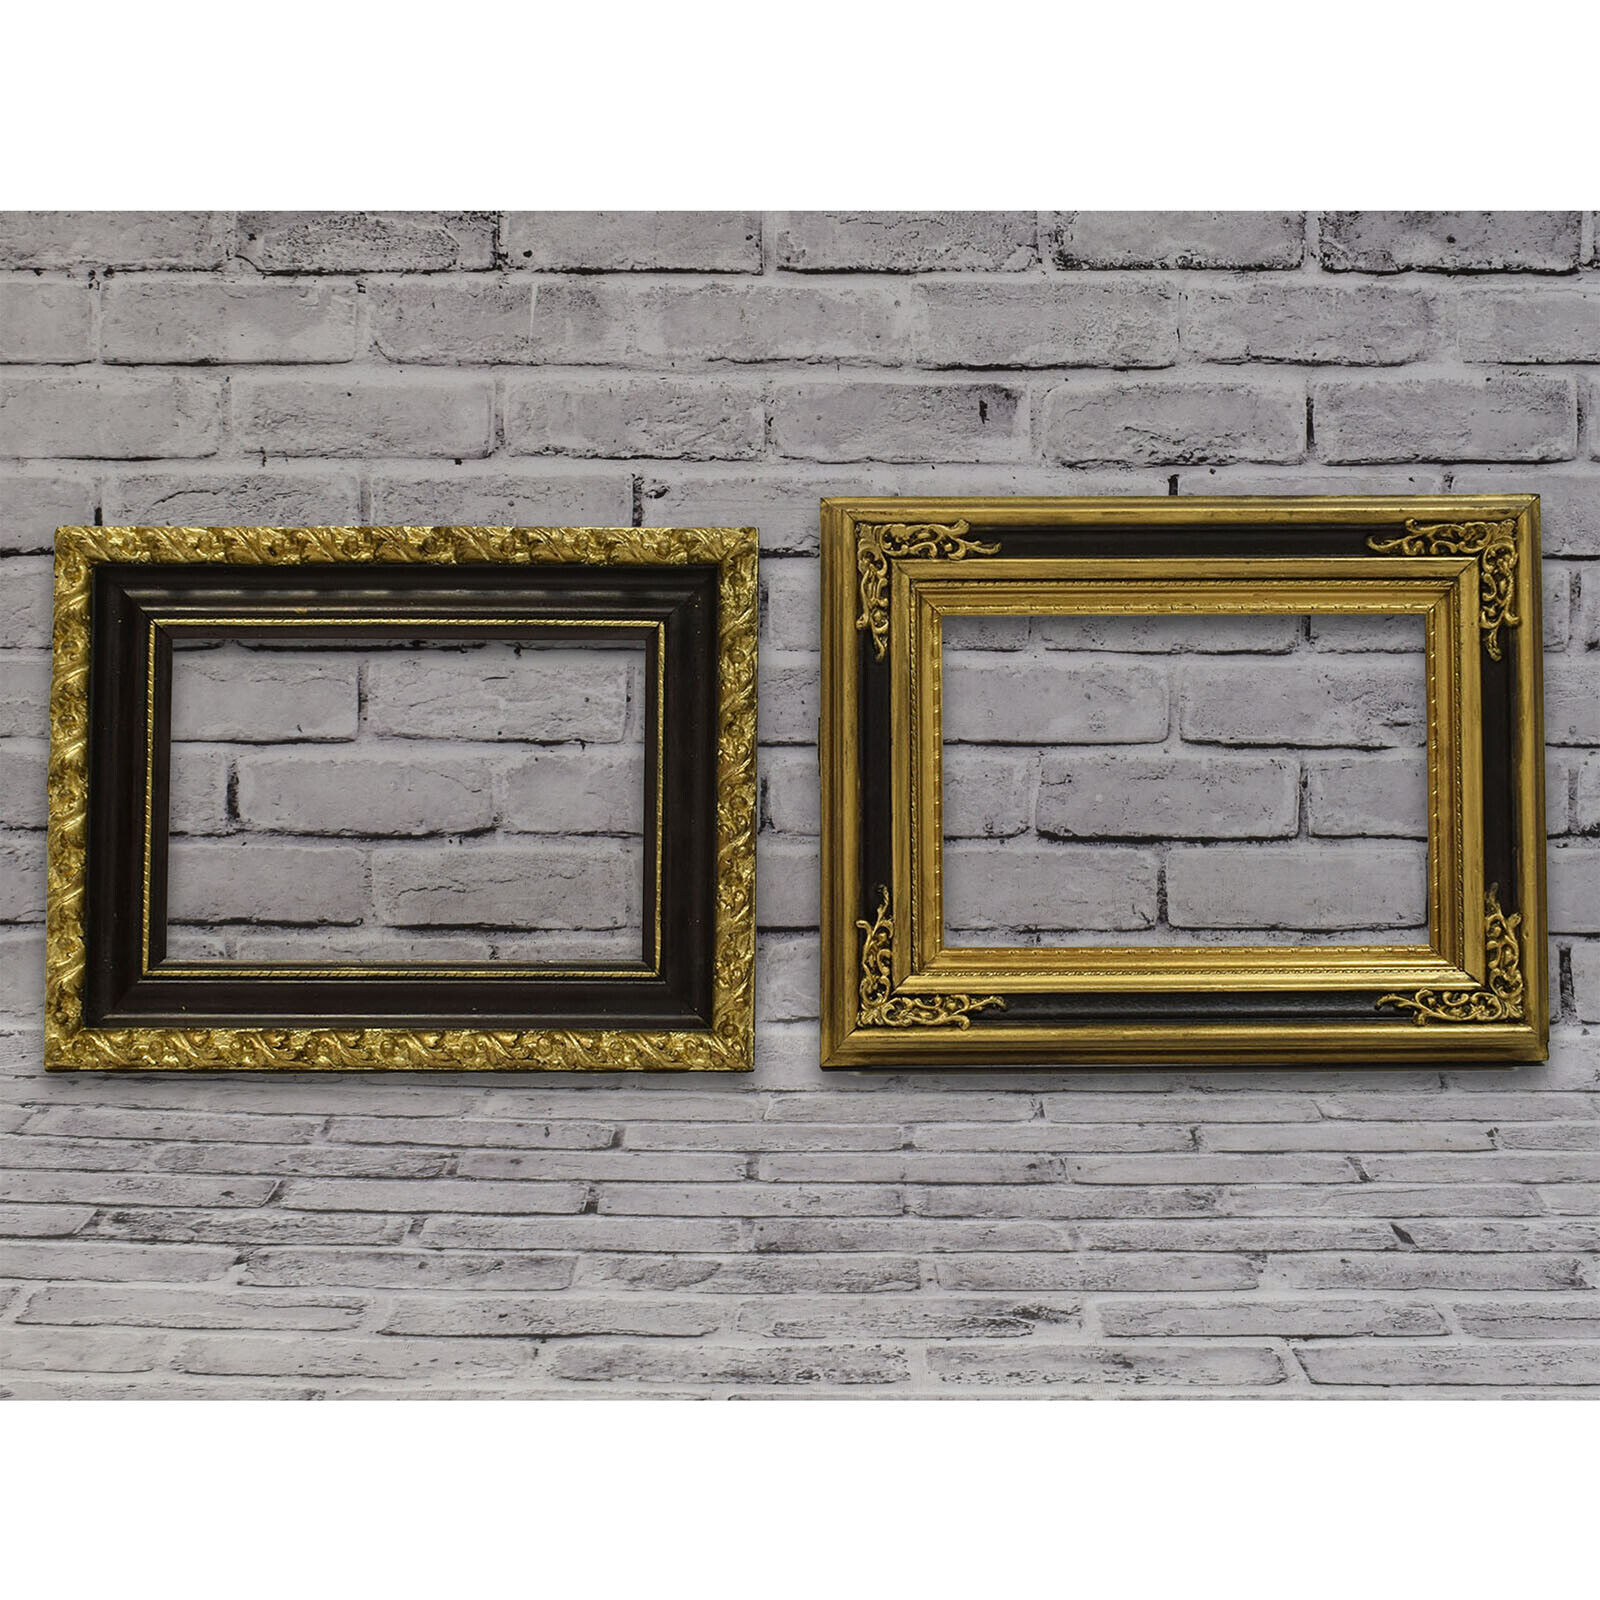 Ca. 1920-1950 Set of 2 old wooden frames dimensions: 13.8 x 8.5 in inside